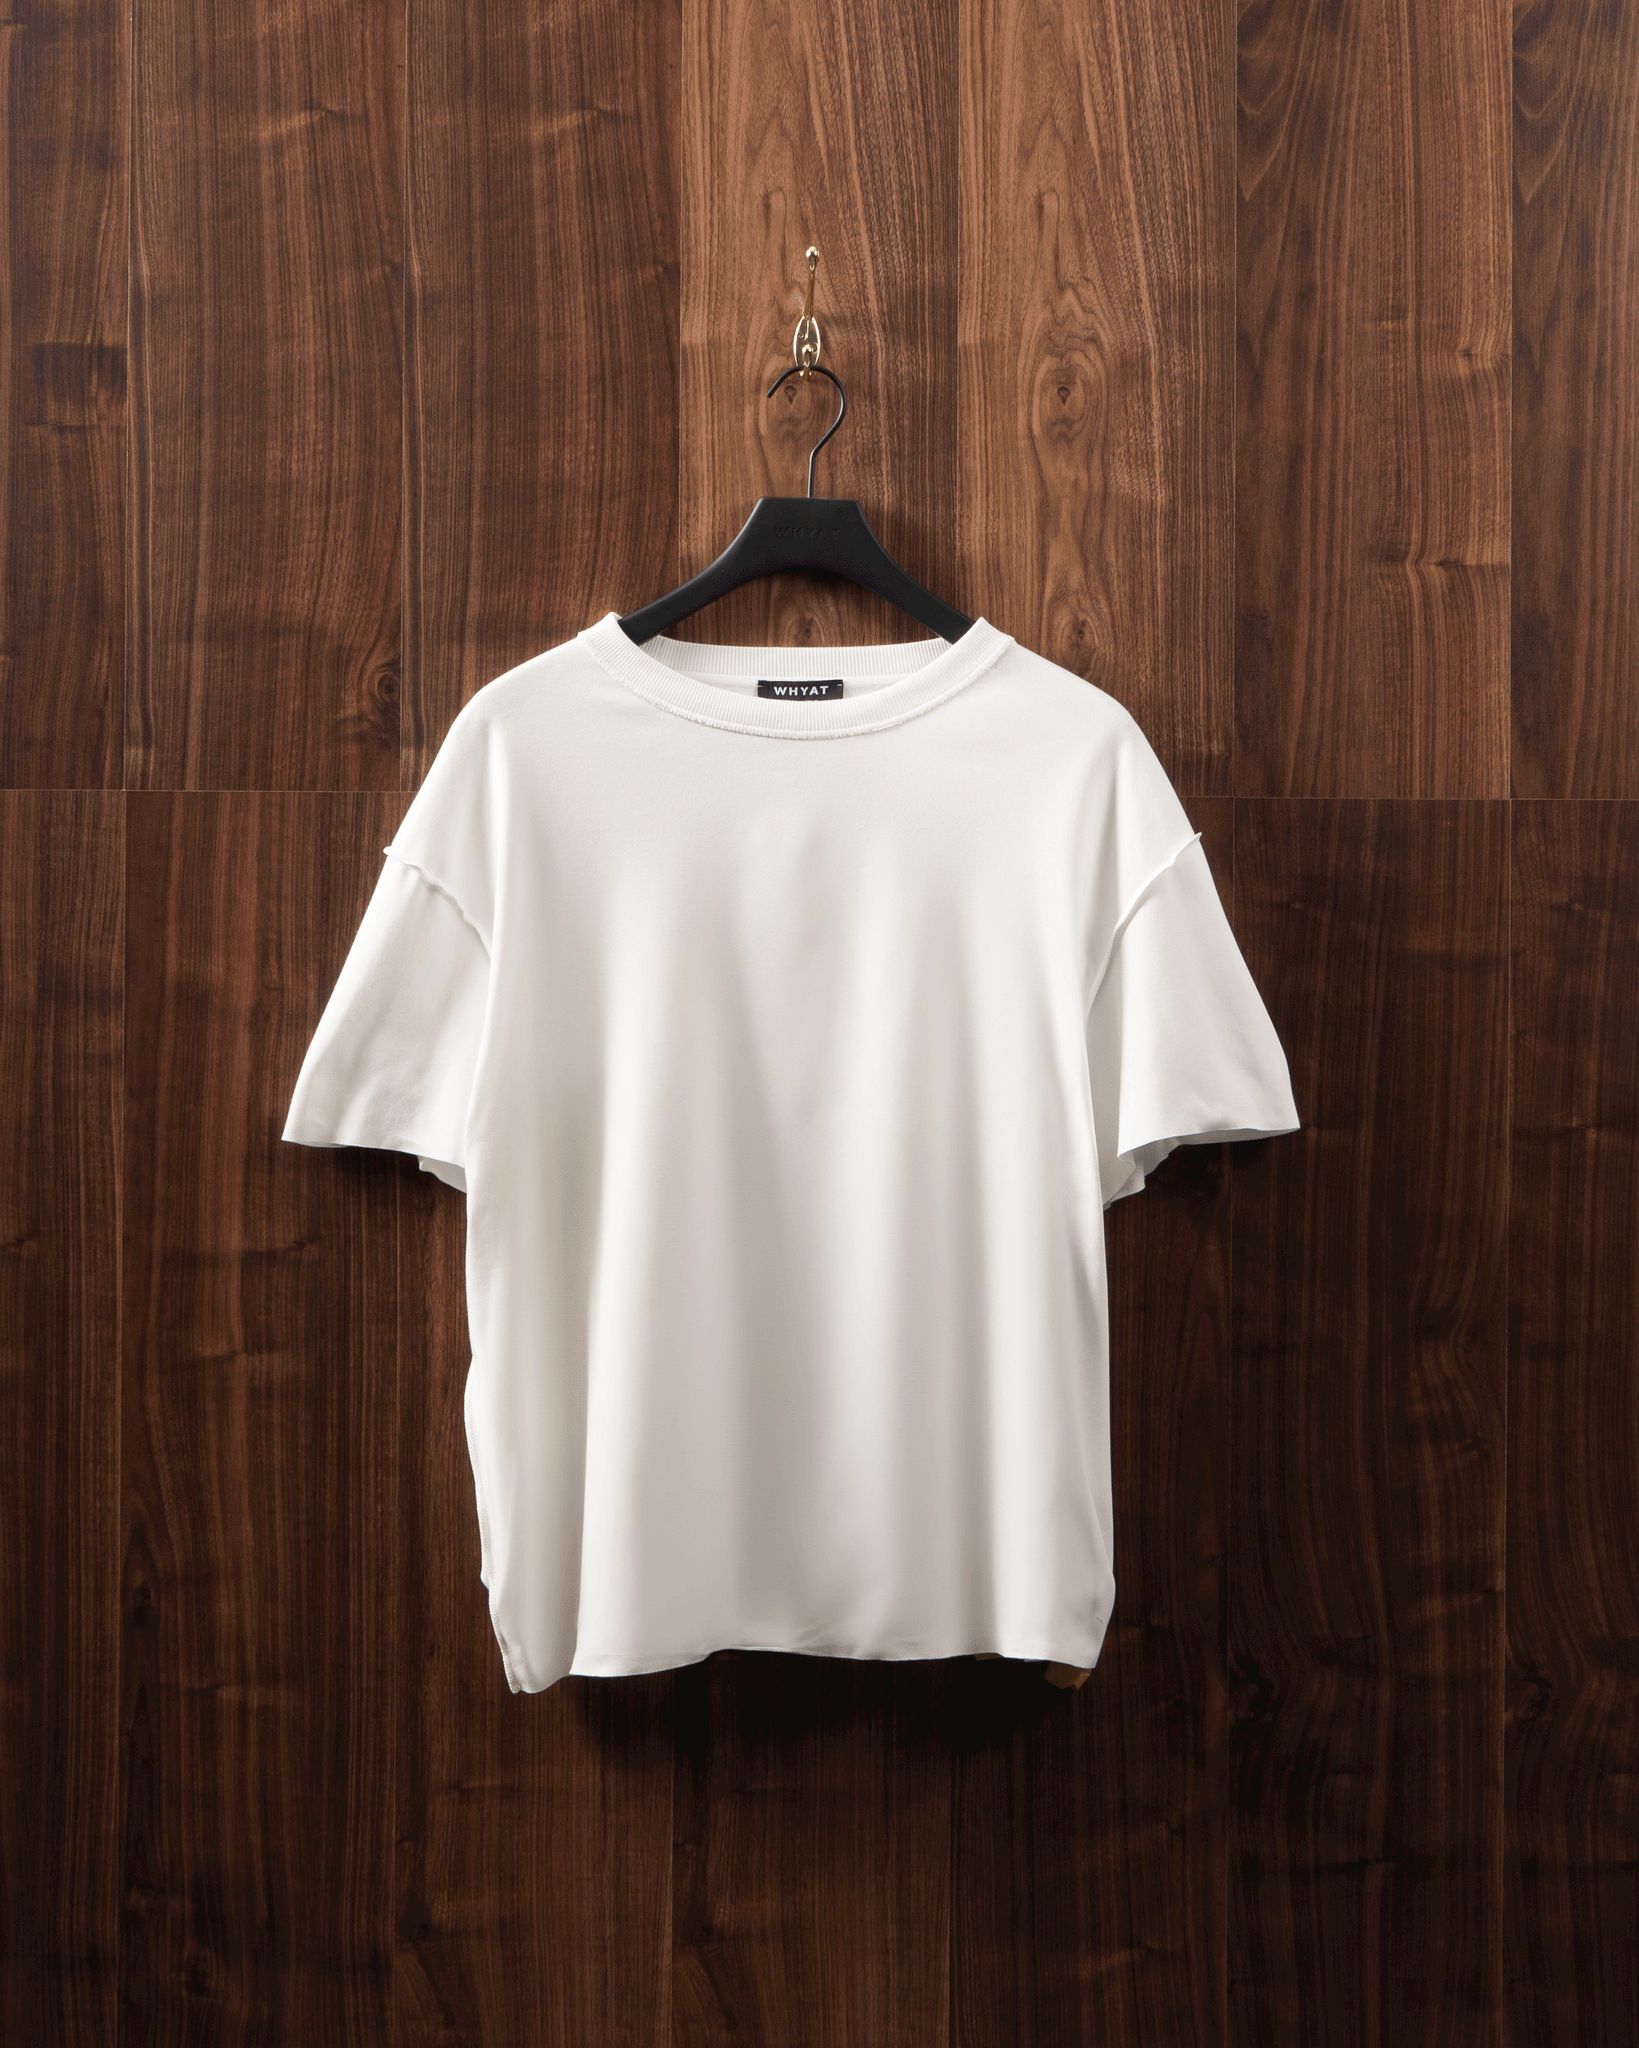 WHYAT INSIDE-OUT TEE "WHYAT-WORLD" LOGO white